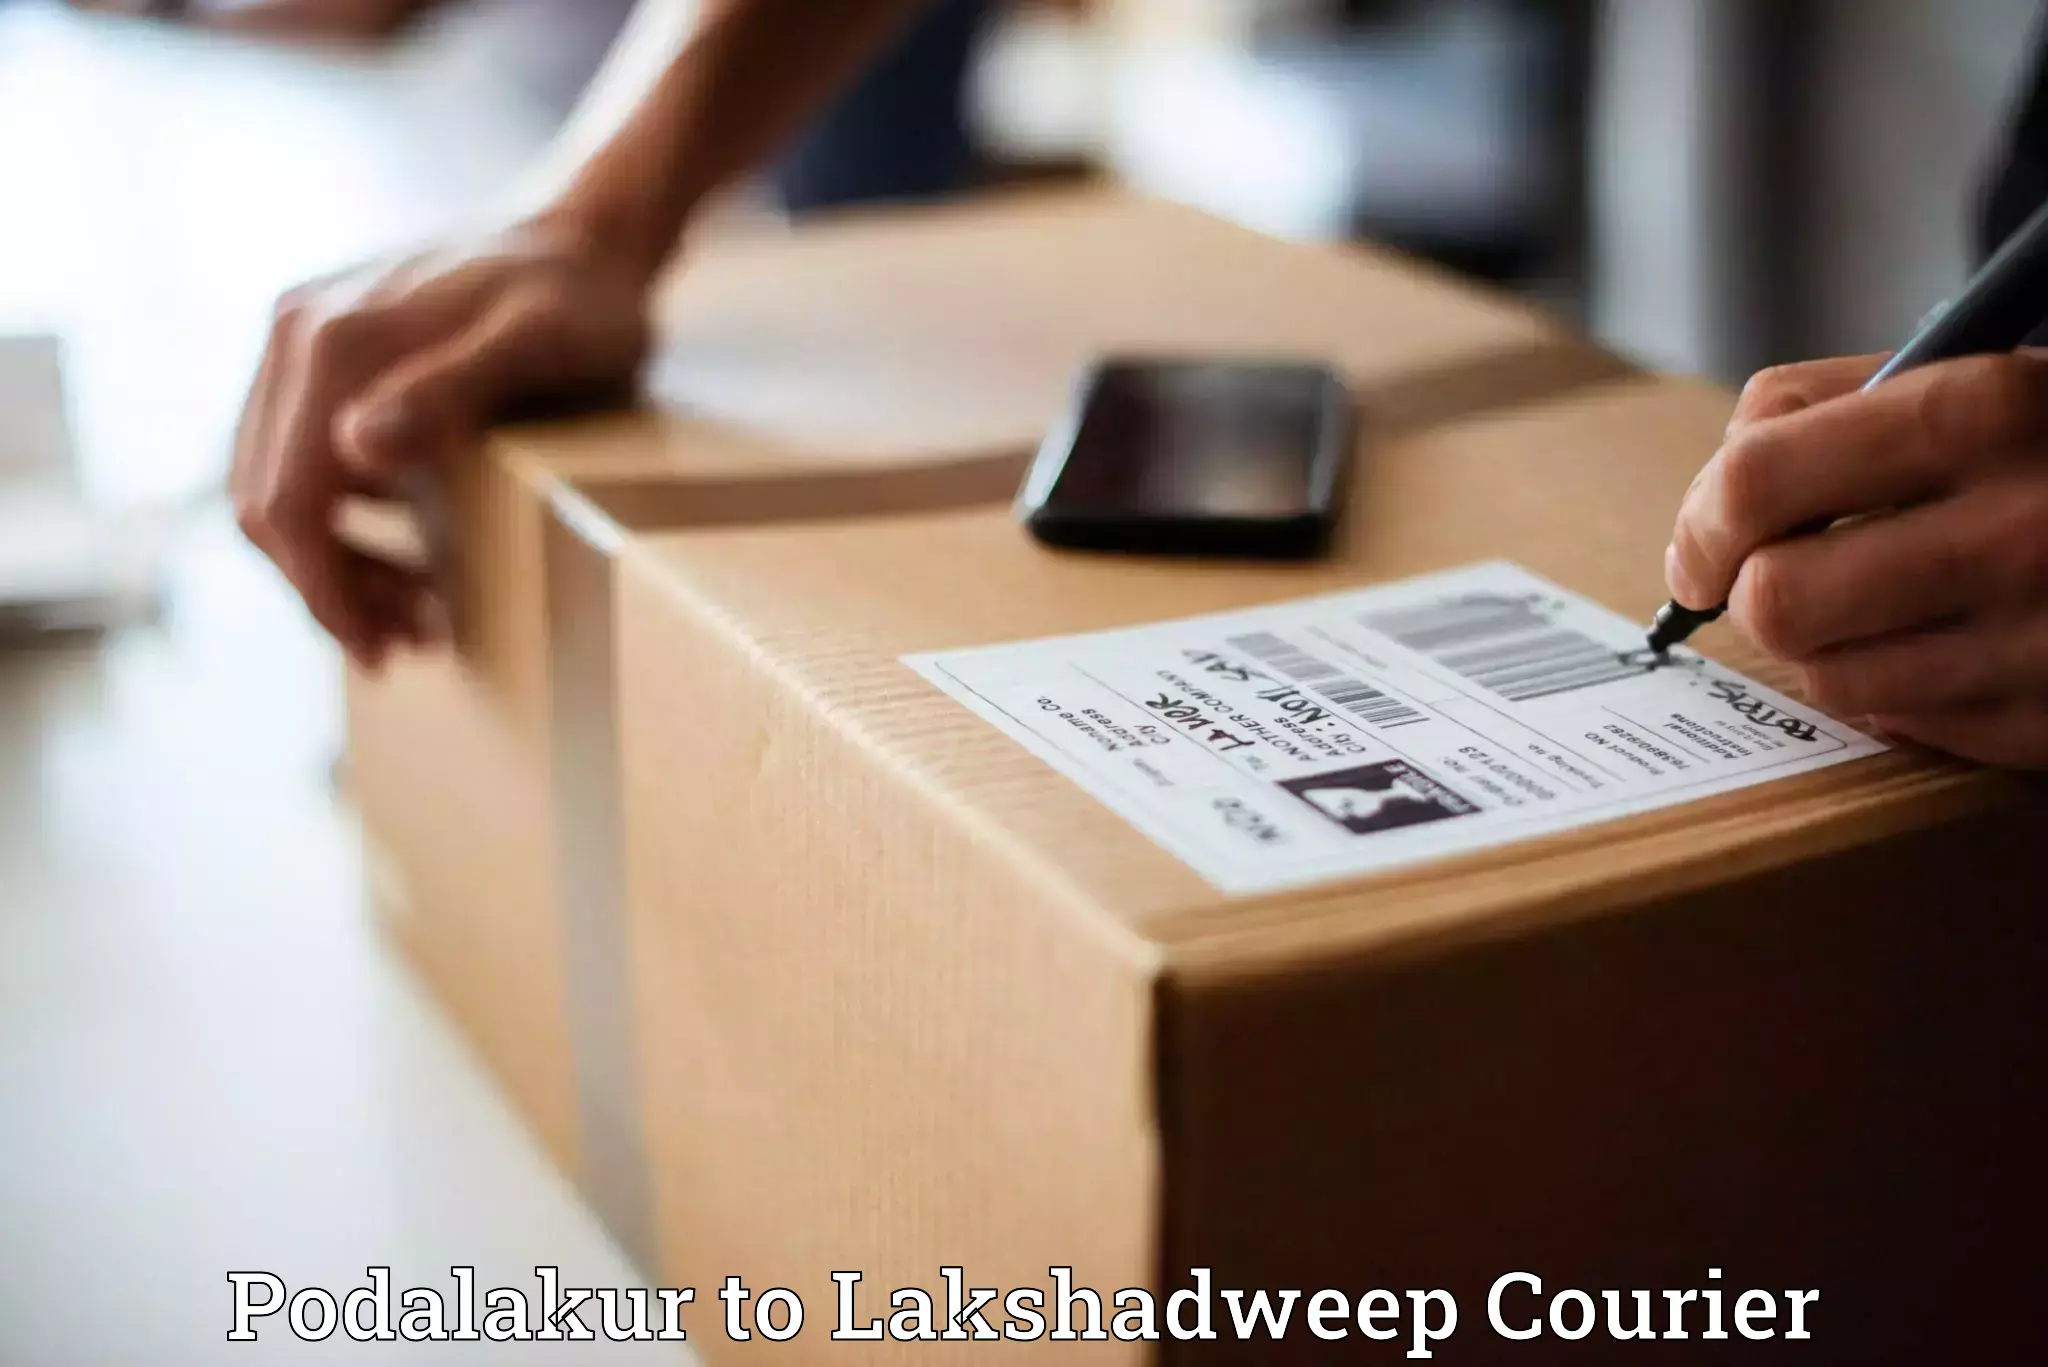 Express delivery network Podalakur to Lakshadweep